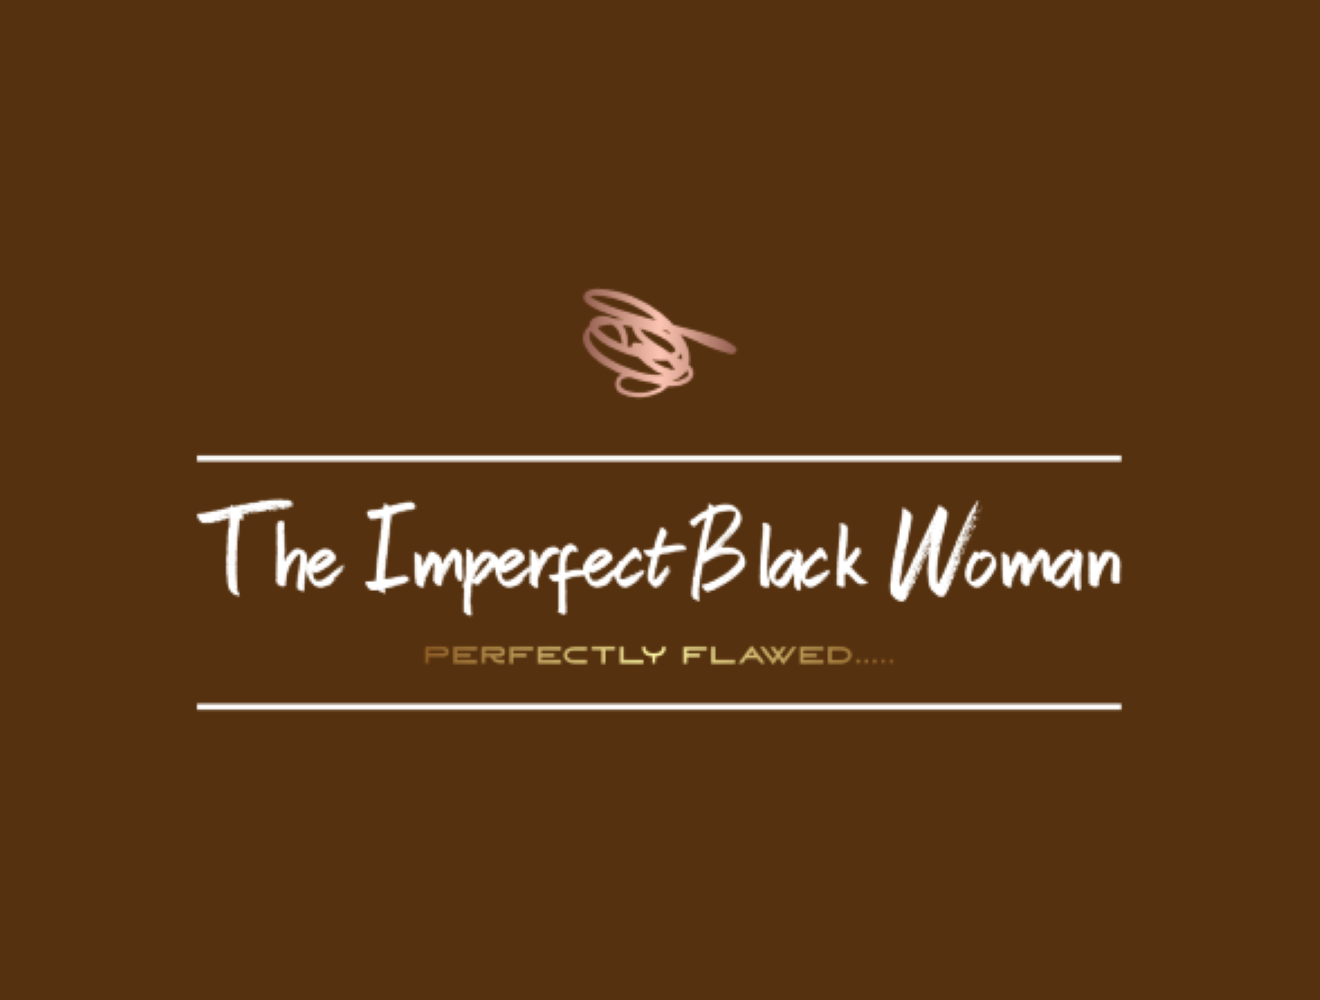 The Imperfect Black Woman